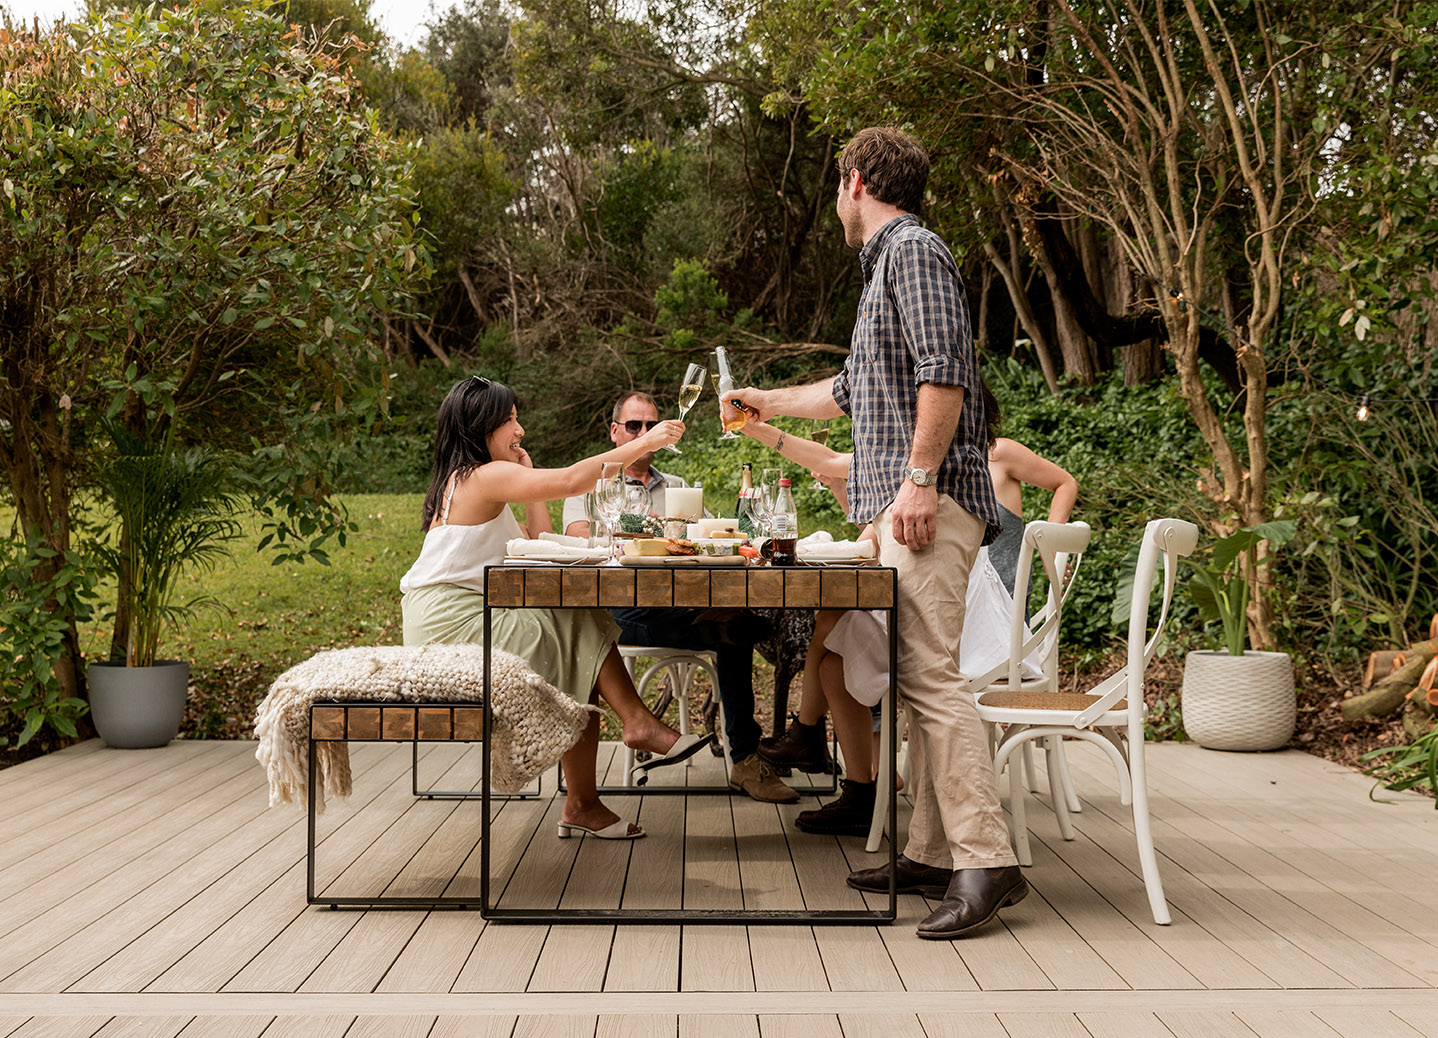 A group of people toasting at a table with composite decking in a backyard.